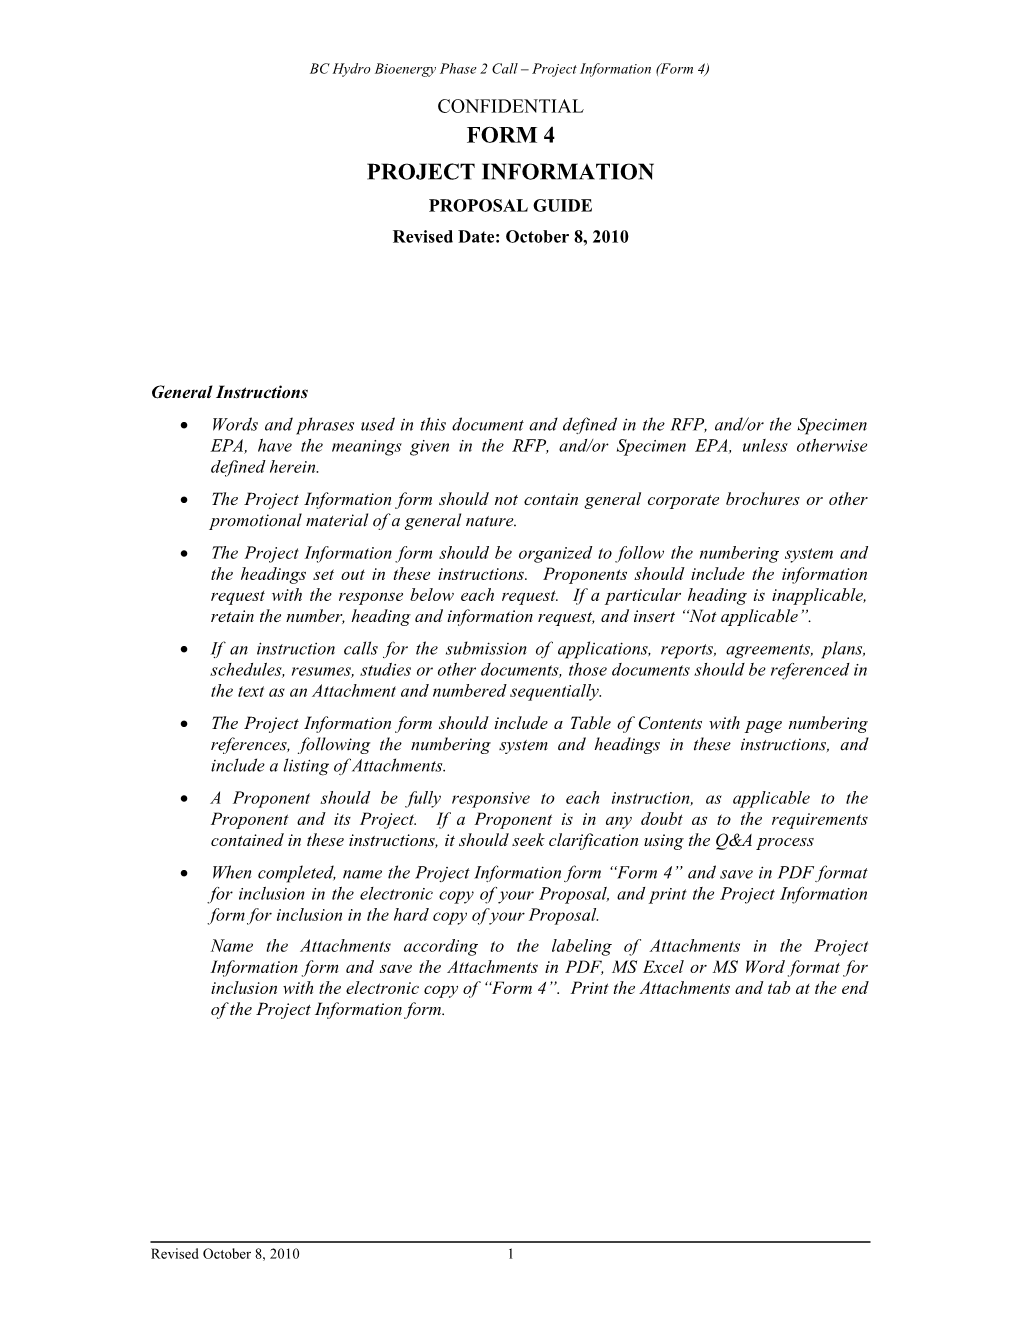 Project Information (Form 4)